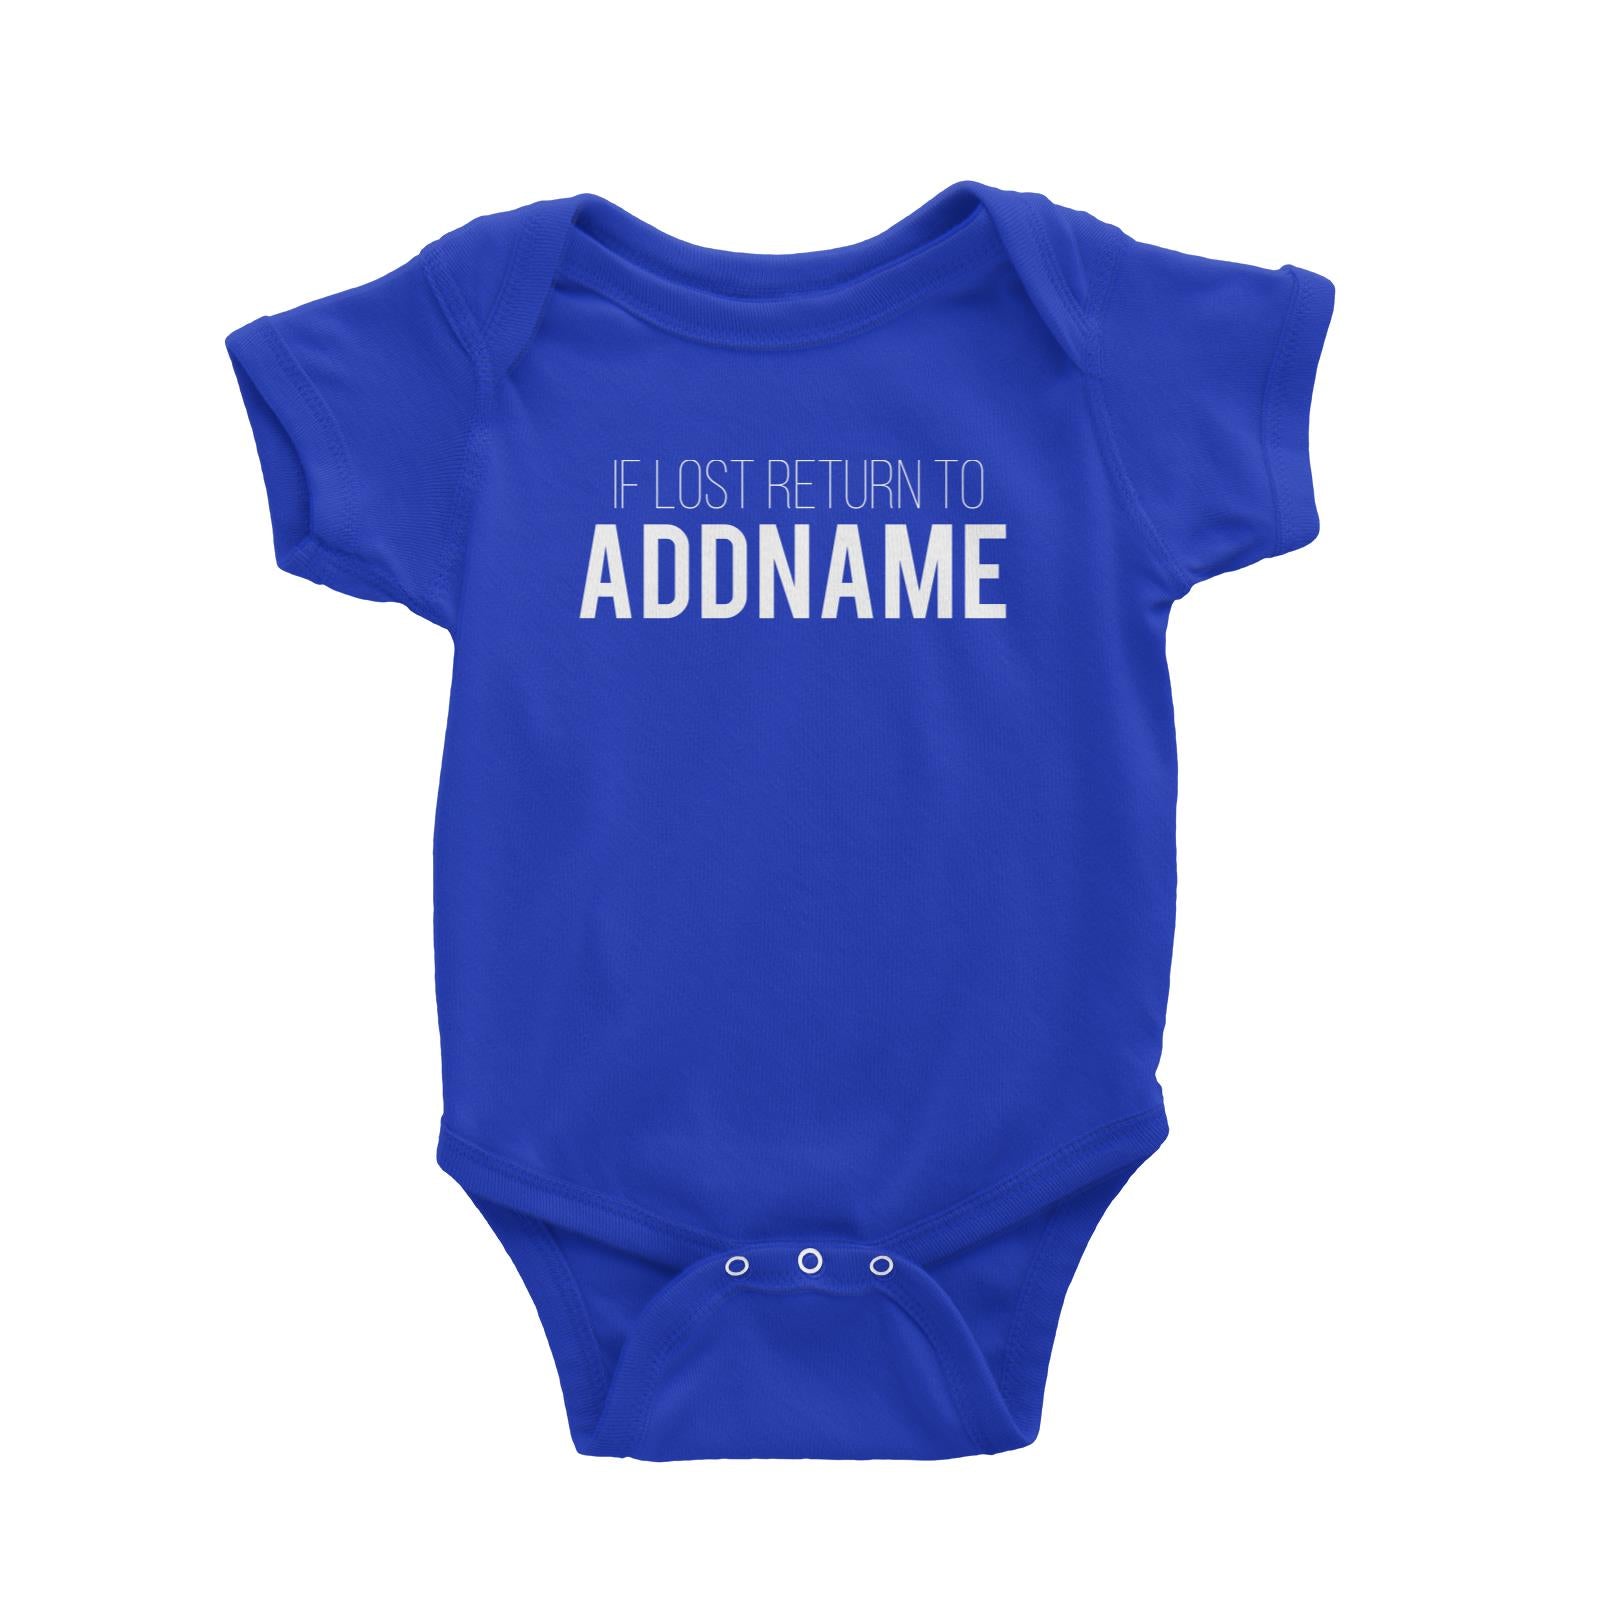 If Lost Return To Addname Baby Romper